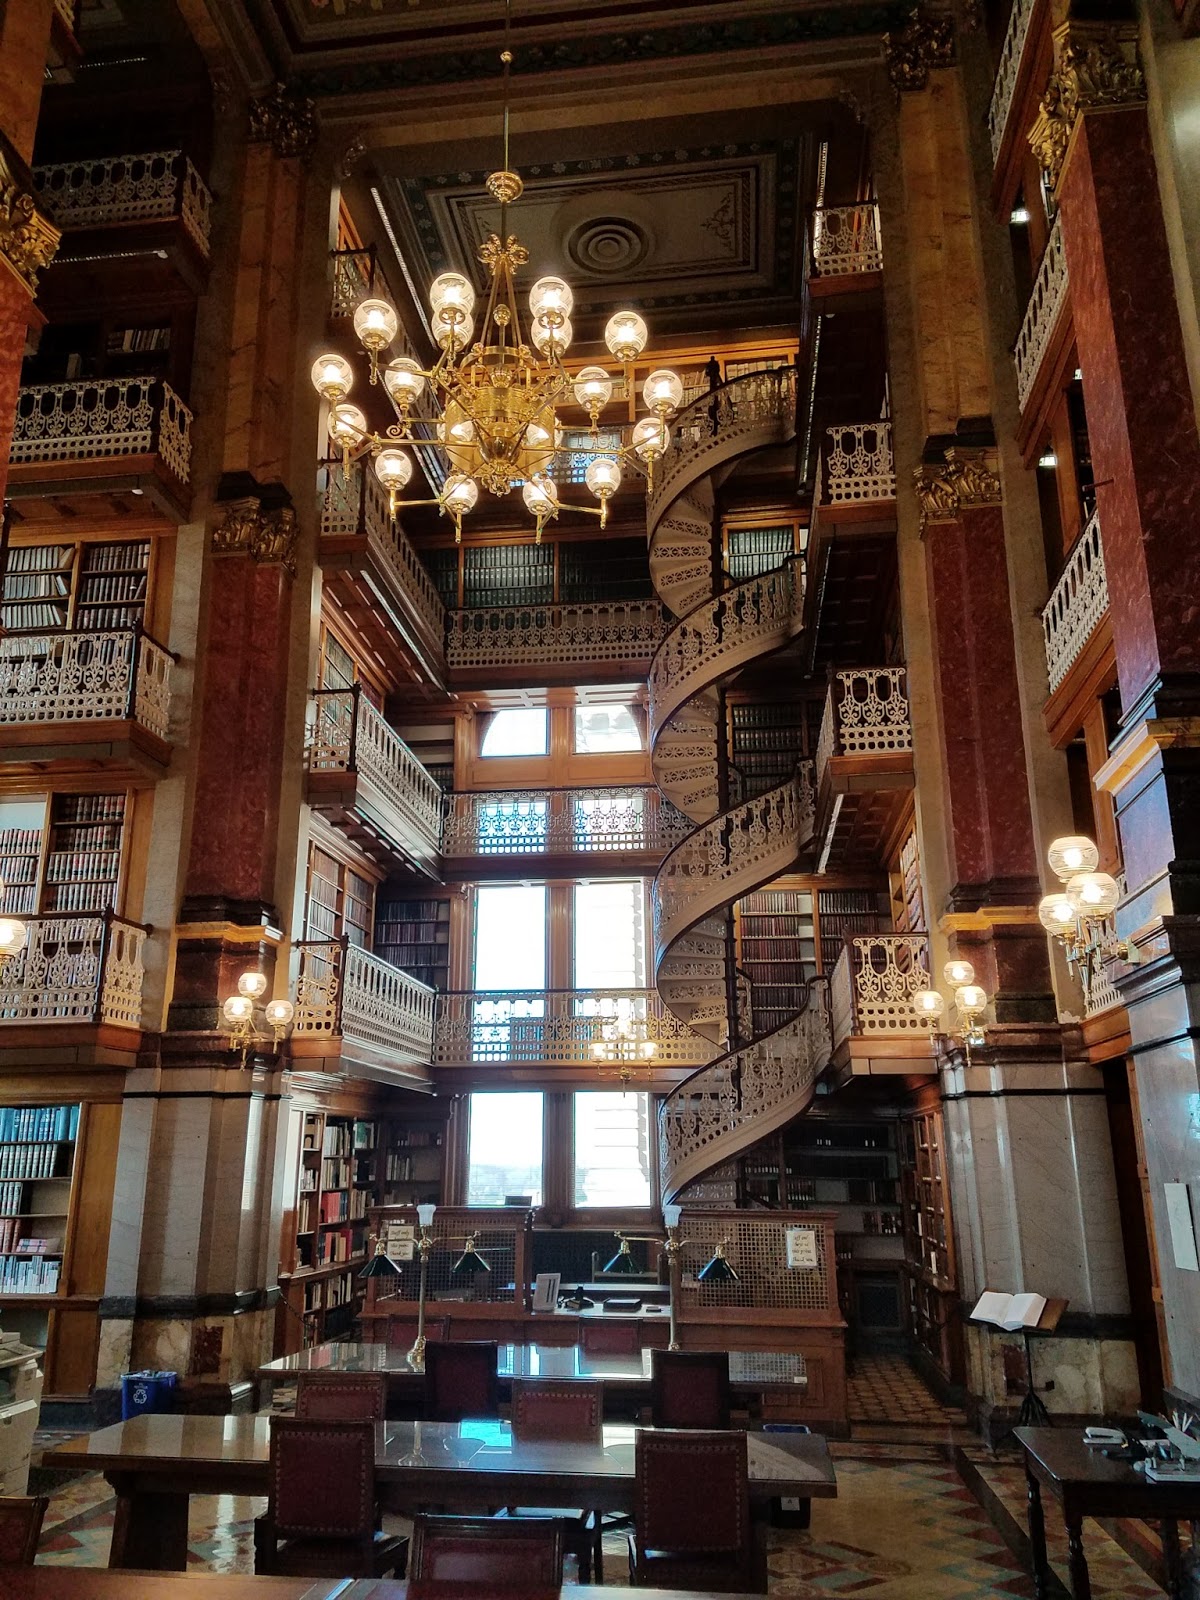 The Library of the Des Moines Capitol with 4 stories and winding staircase.